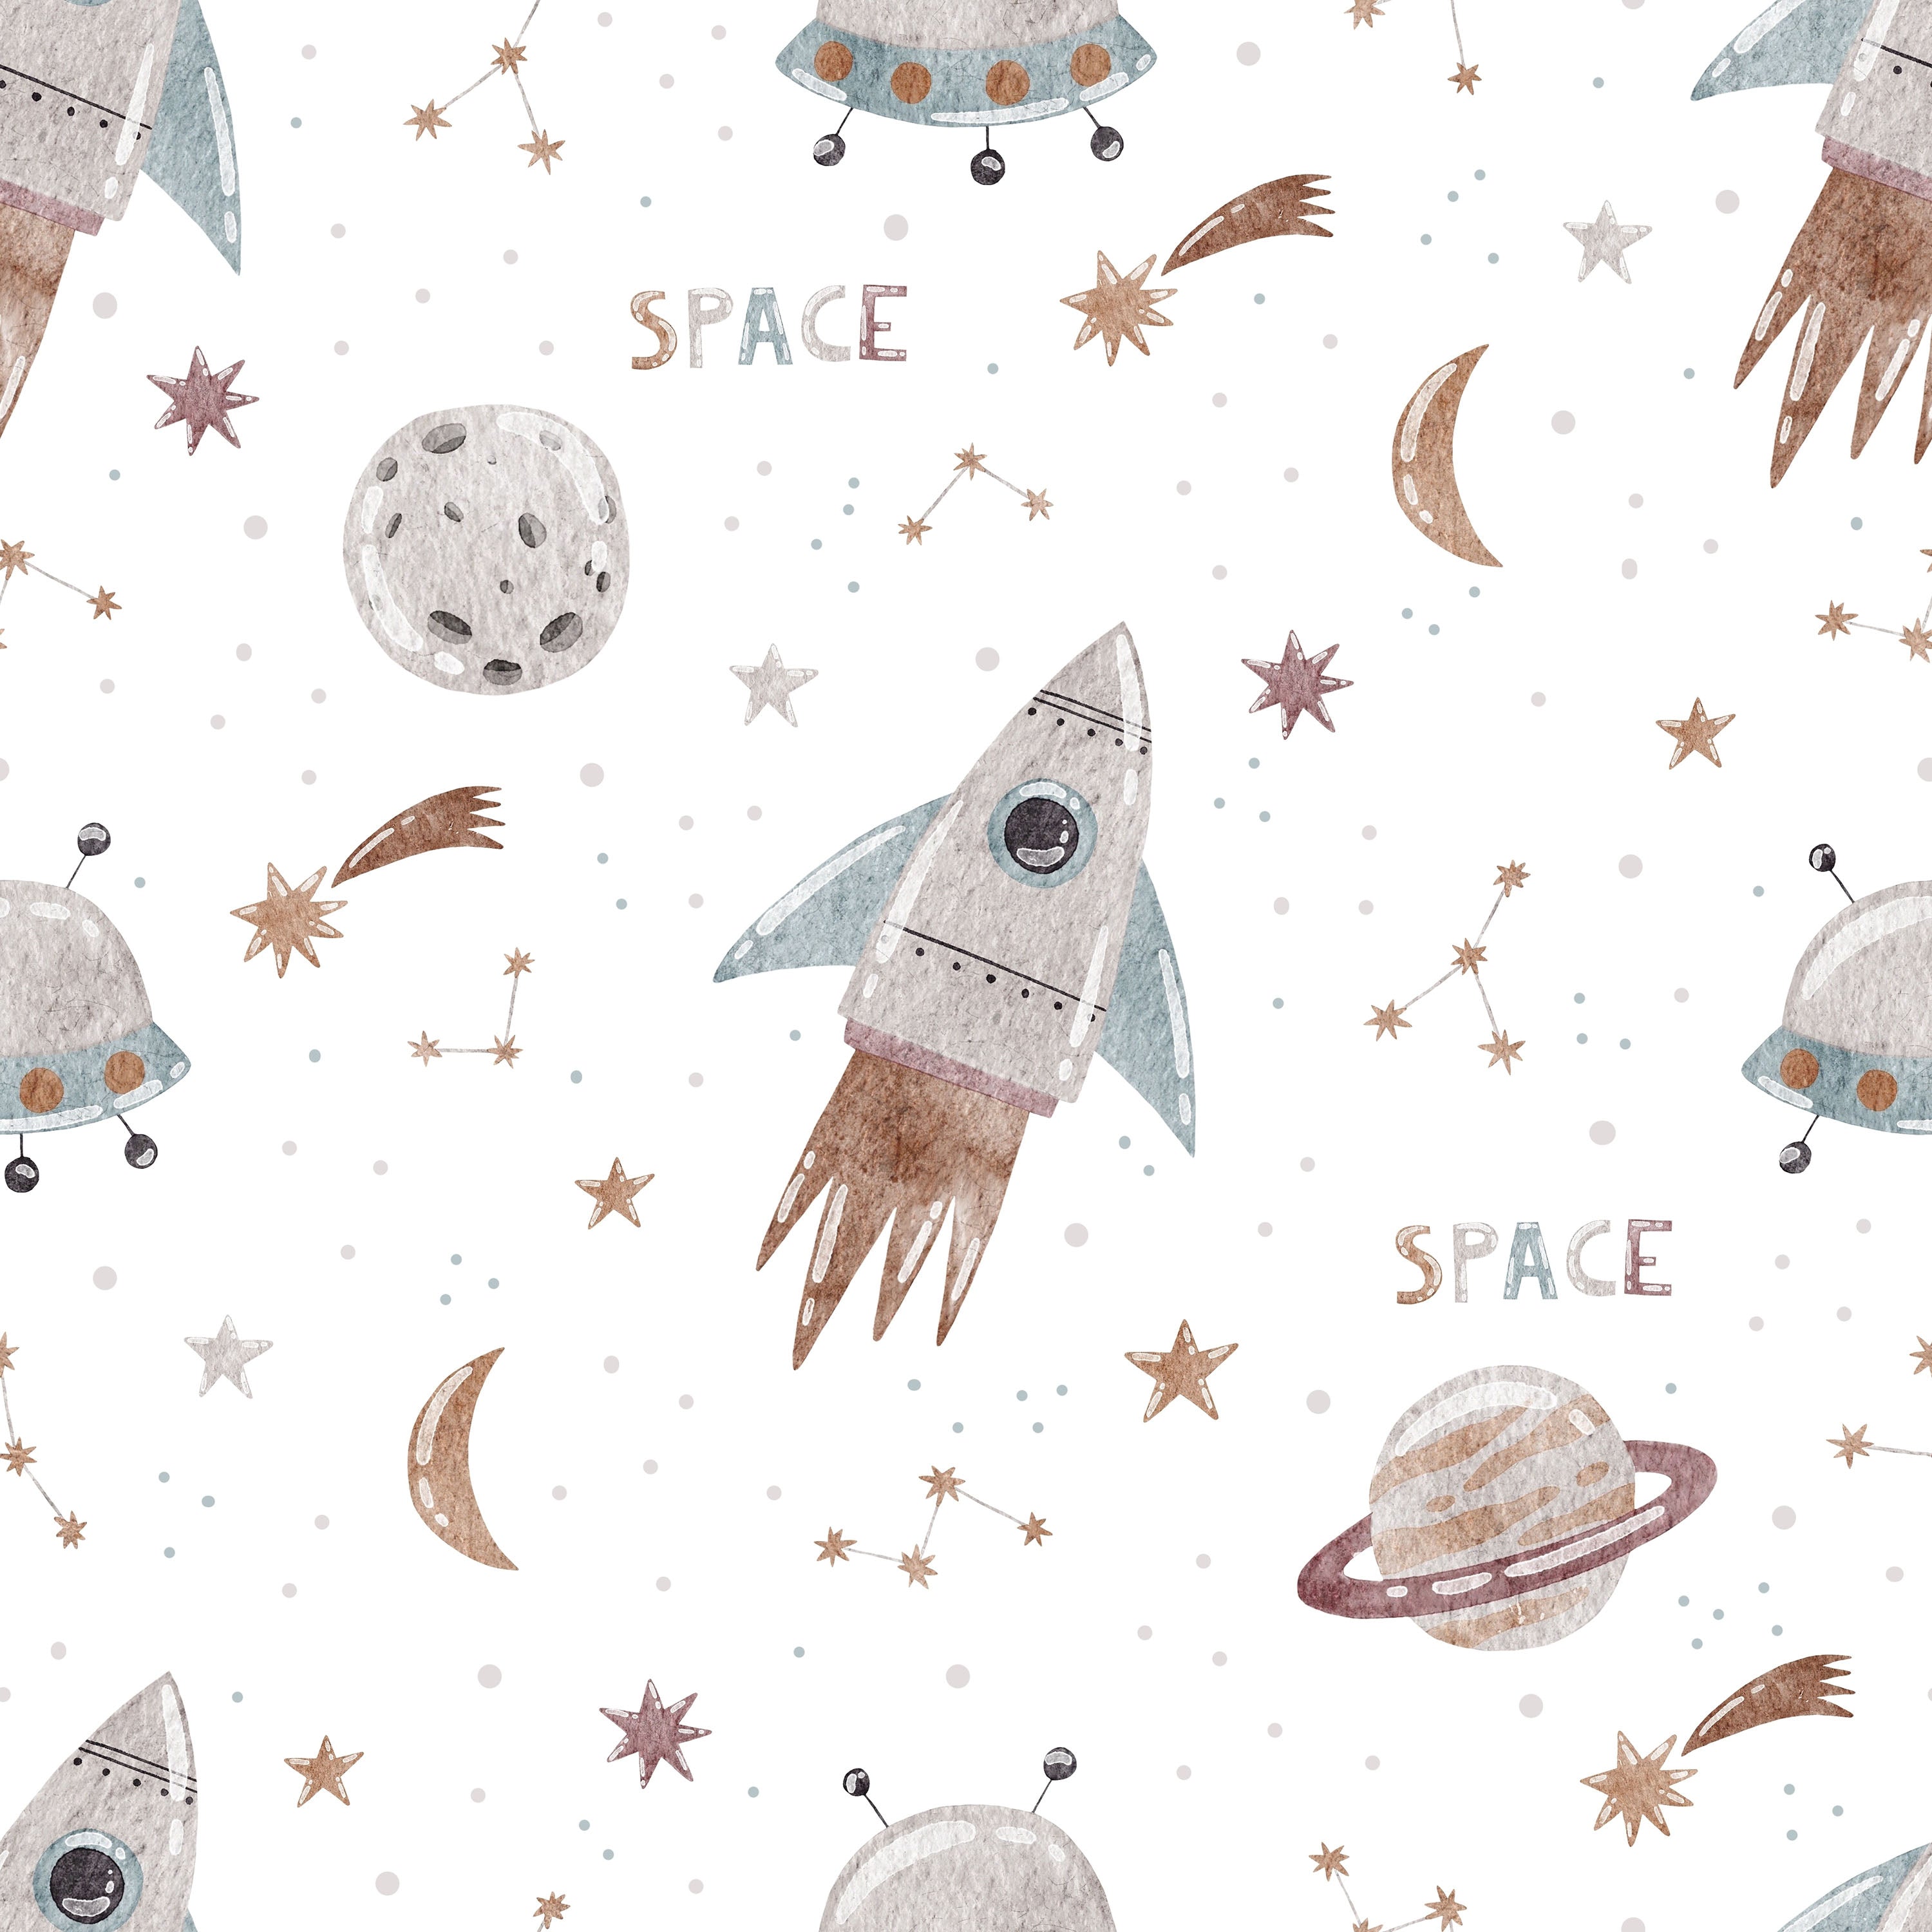 Close-up view of the Space Craze Wallpaper, showcasing a delightful array of space-themed illustrations including rockets, planets, moons, and stars, all rendered in soft, muted tones on a white background, perfect for inspiring young minds.